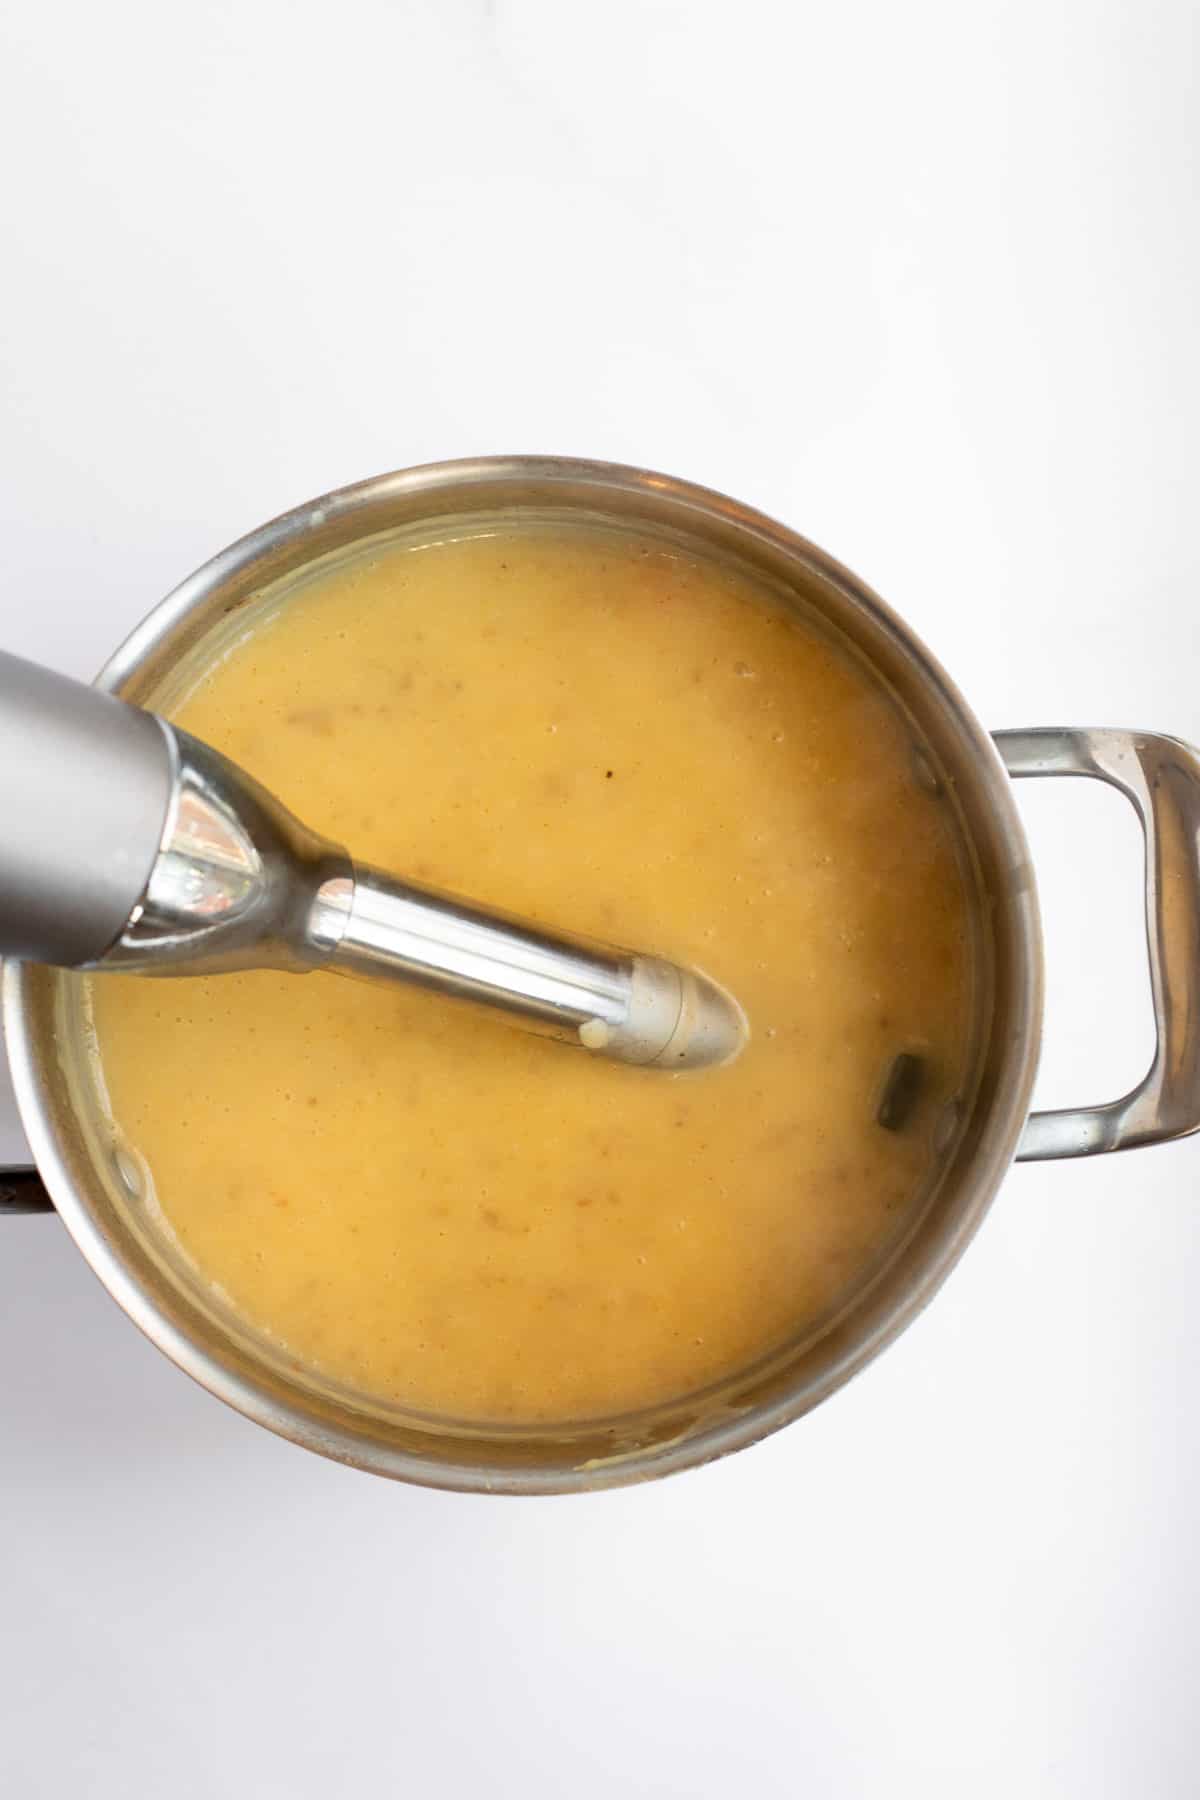 healthy potato soup in a silver pot with an immersion blender.